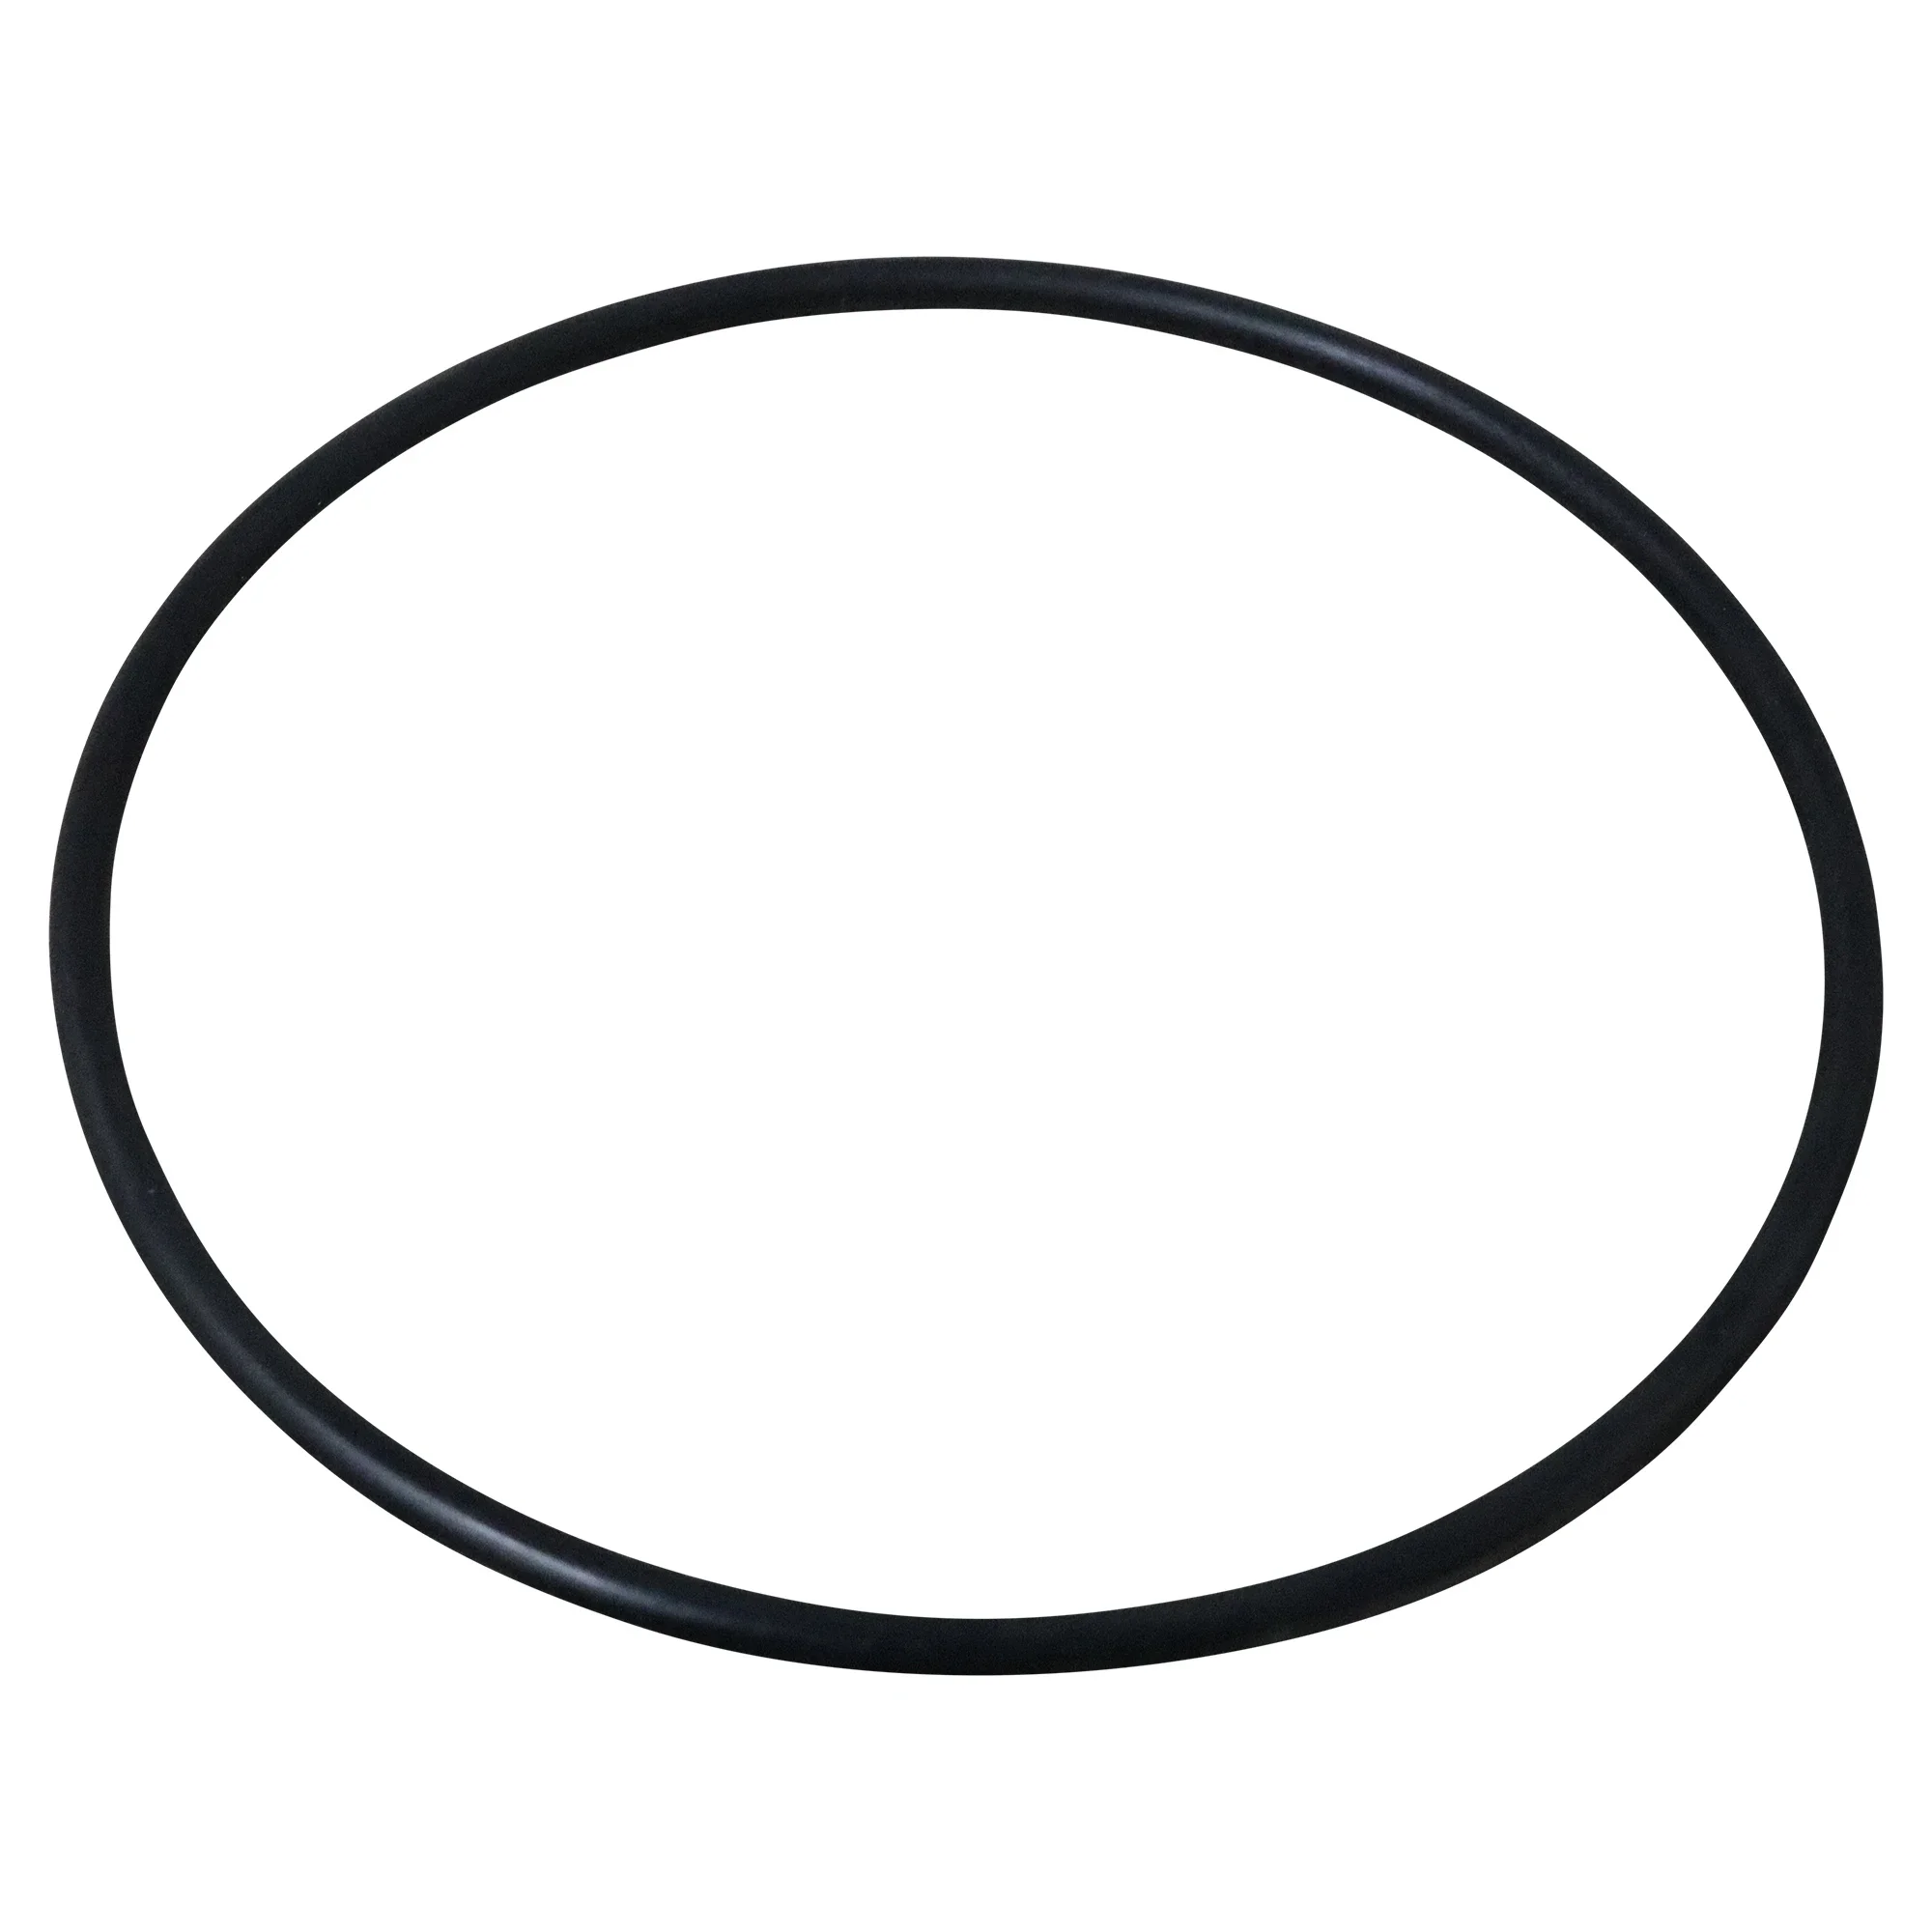 Wastebuilt® Replacement for McNeilus O-Ring MON72352